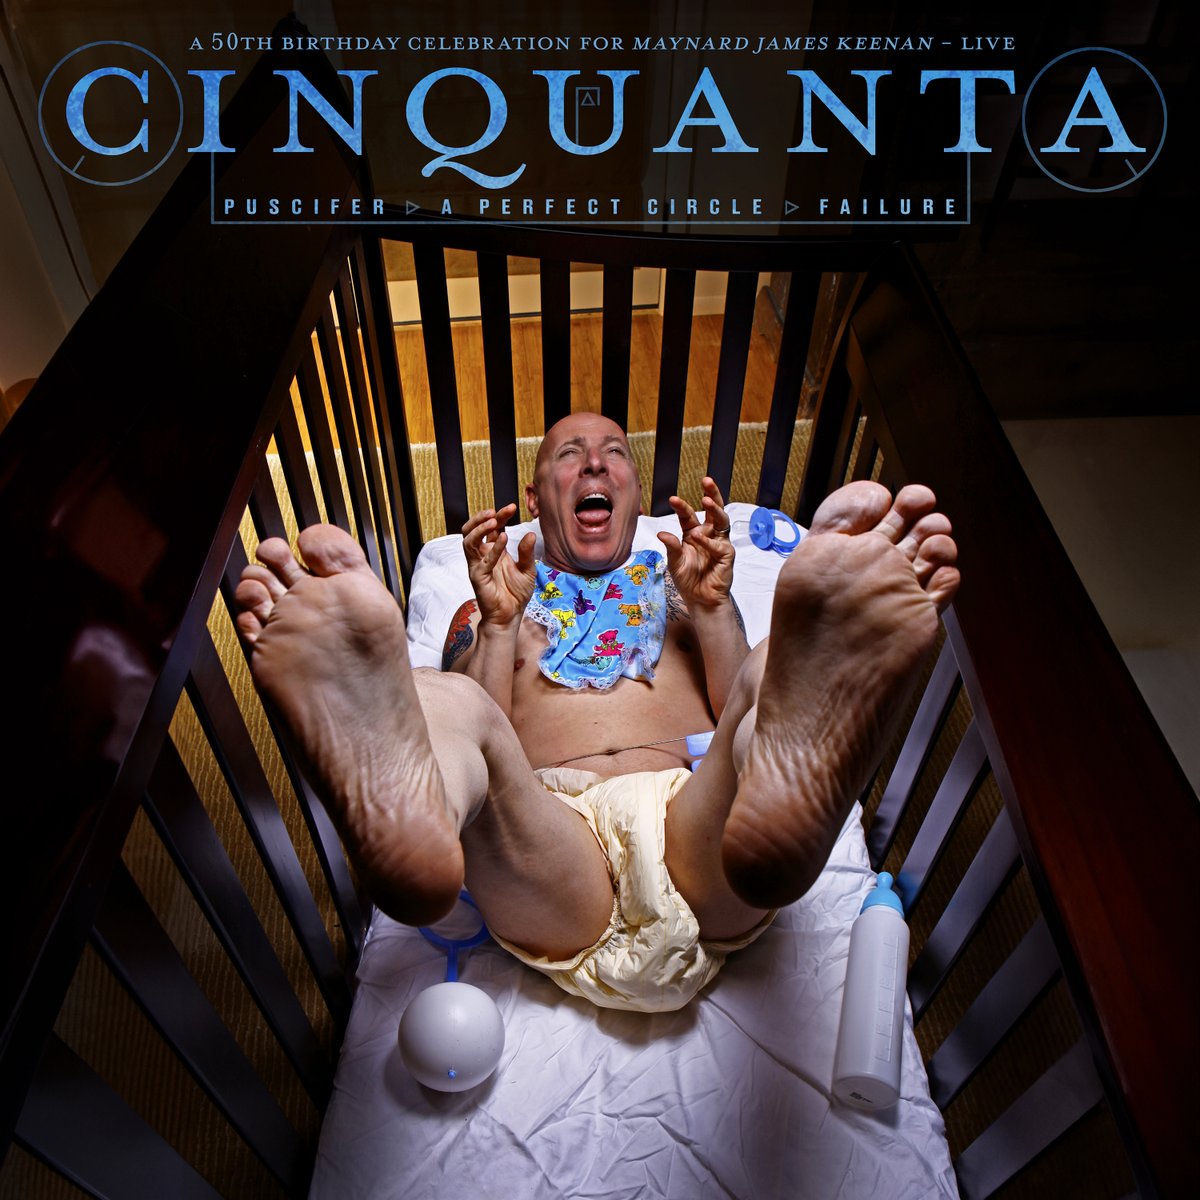 Cinquanta is out on vinyl now, featuring A Perfect Circle, @puscifer & @Failure, get it now via Puscifer.com, @Revolvermag & indie record stores